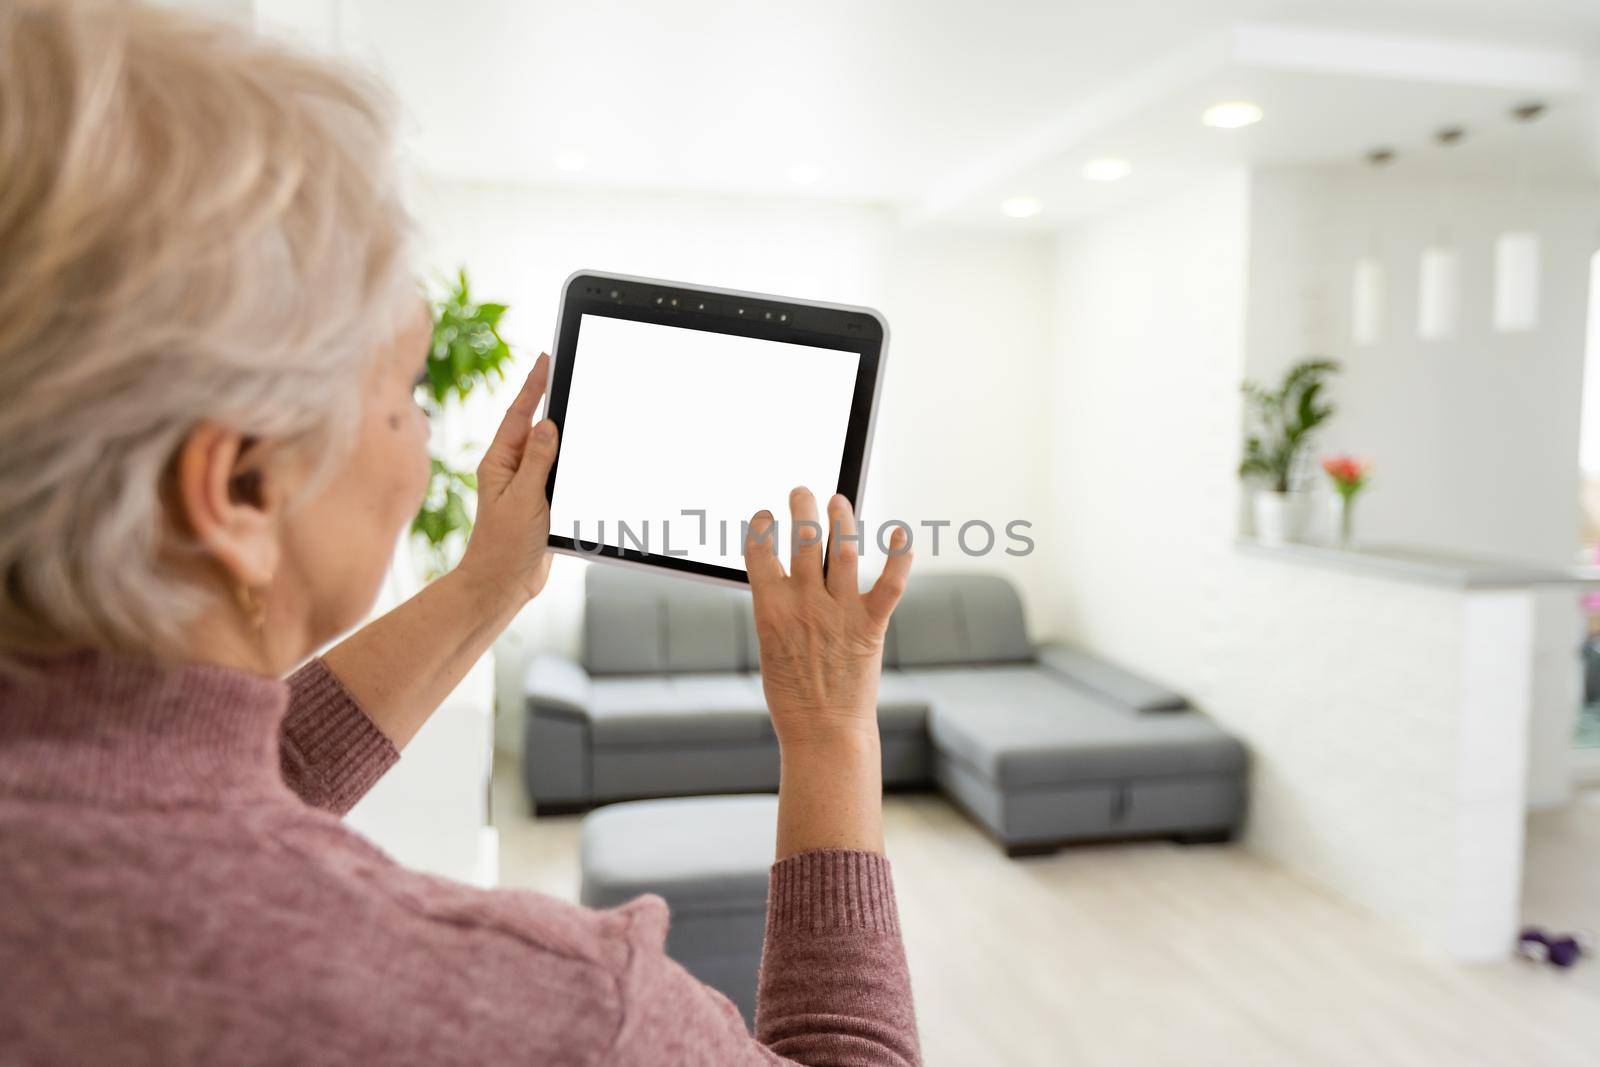 Senior woman at home standing at kitchen holding digital tablet controlling smart home system back view checking cameras close-up.